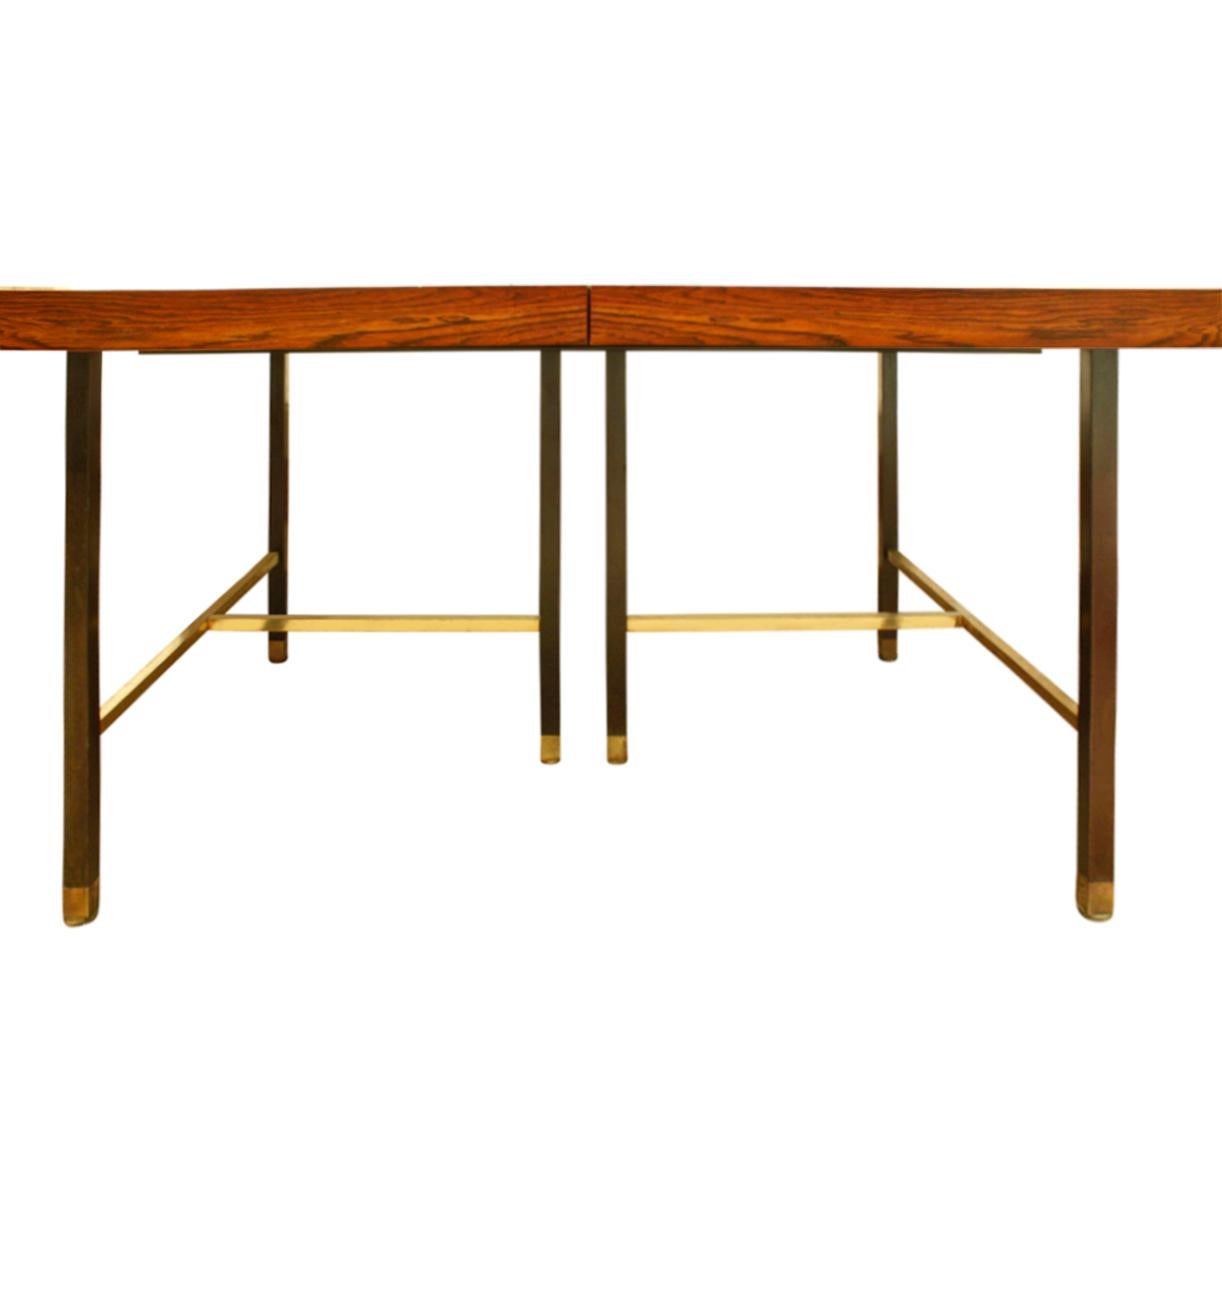 Mid-20th Century Harvey Probber Dining Table With 2 Leaves In Brazilian Rosewood 1950s (Signed)